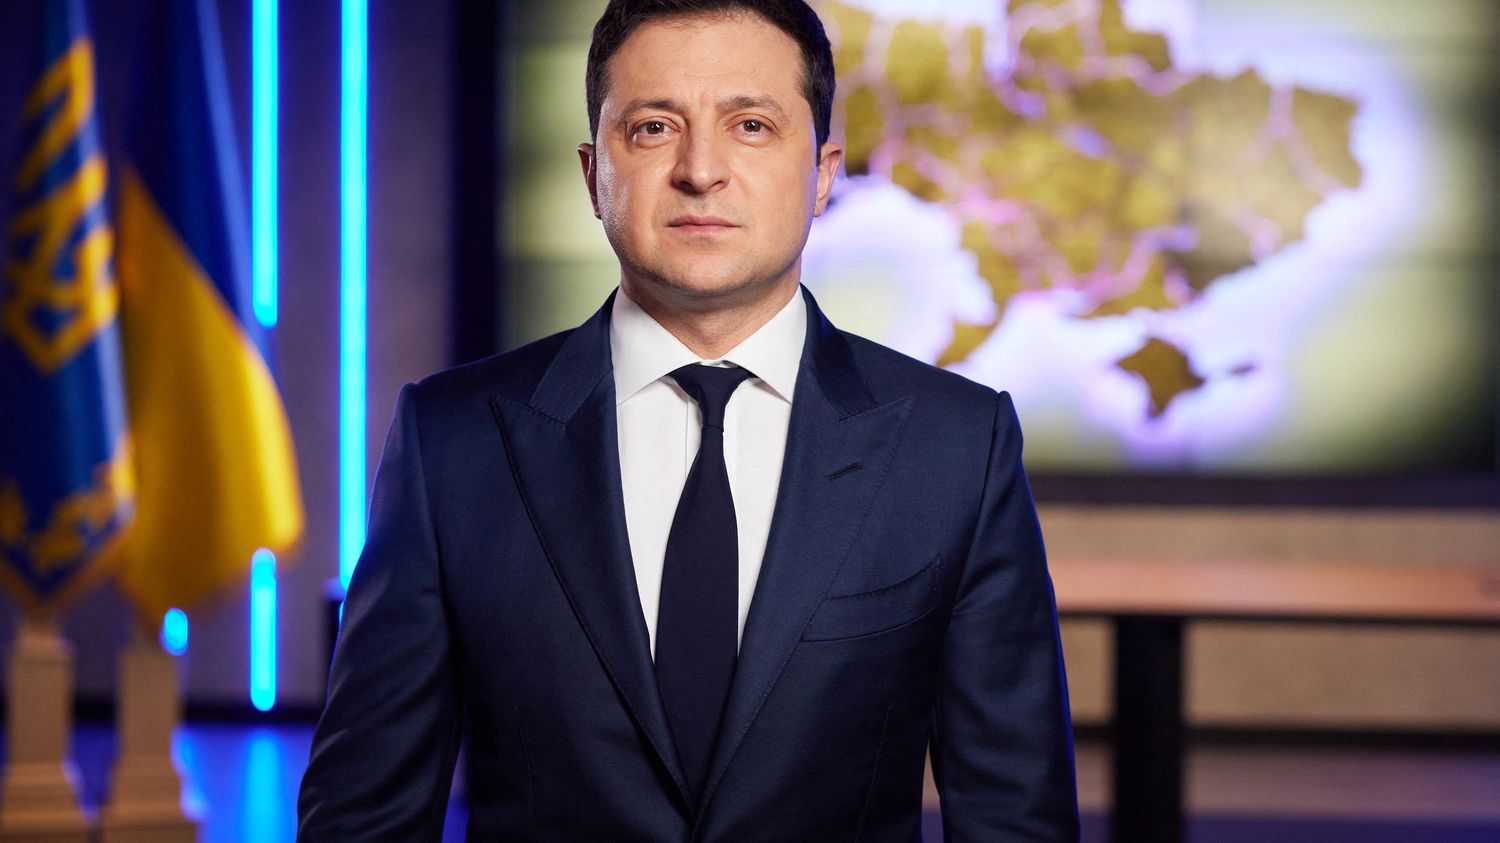 A collection of speeches by Ukrainian President Zelensky published in French in May
